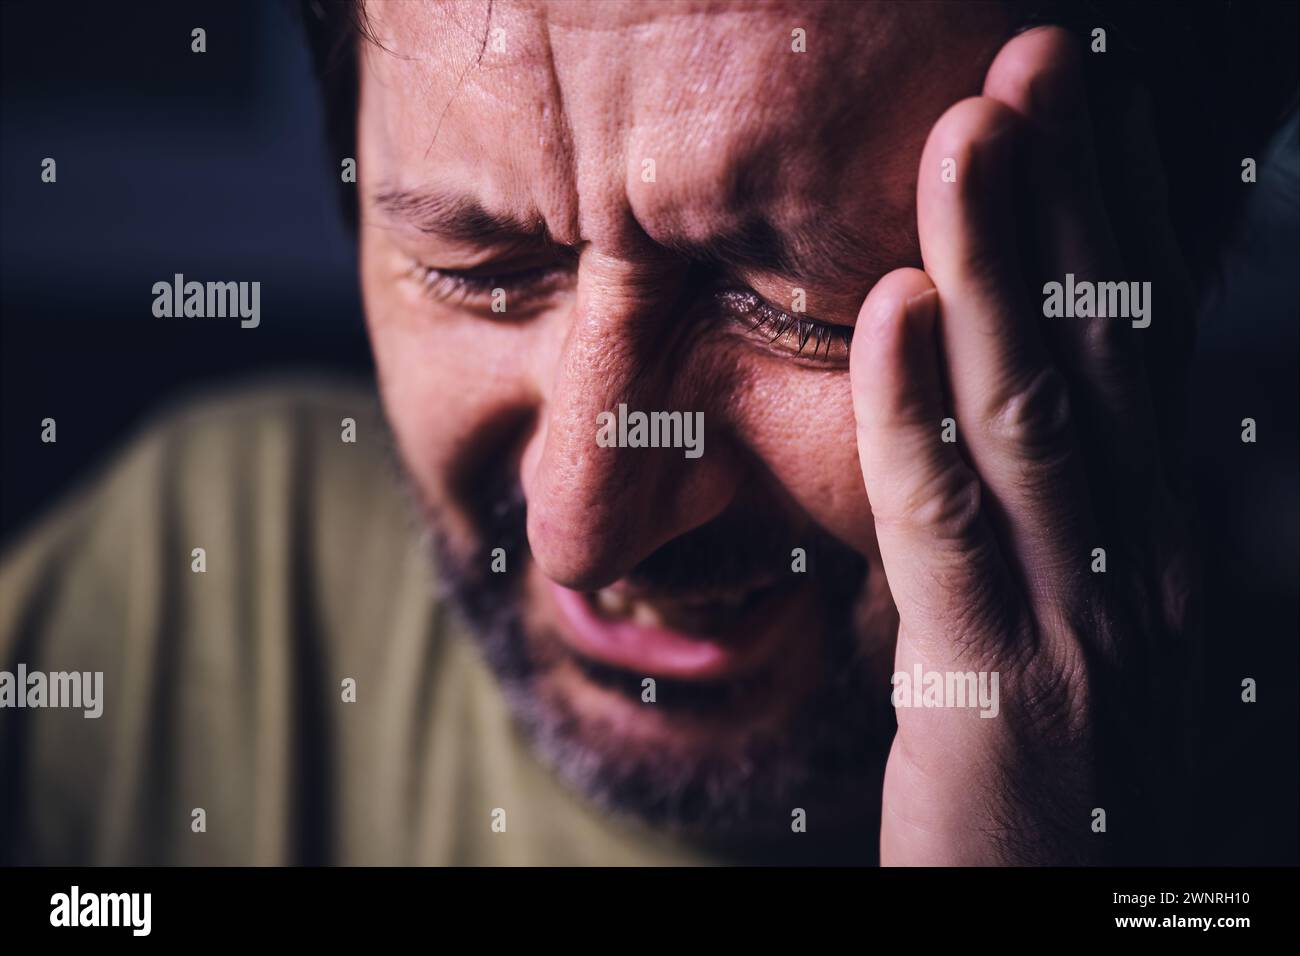 Grief and sadness, adult male crying in dark room, low key portrait with selective focus Stock Photo